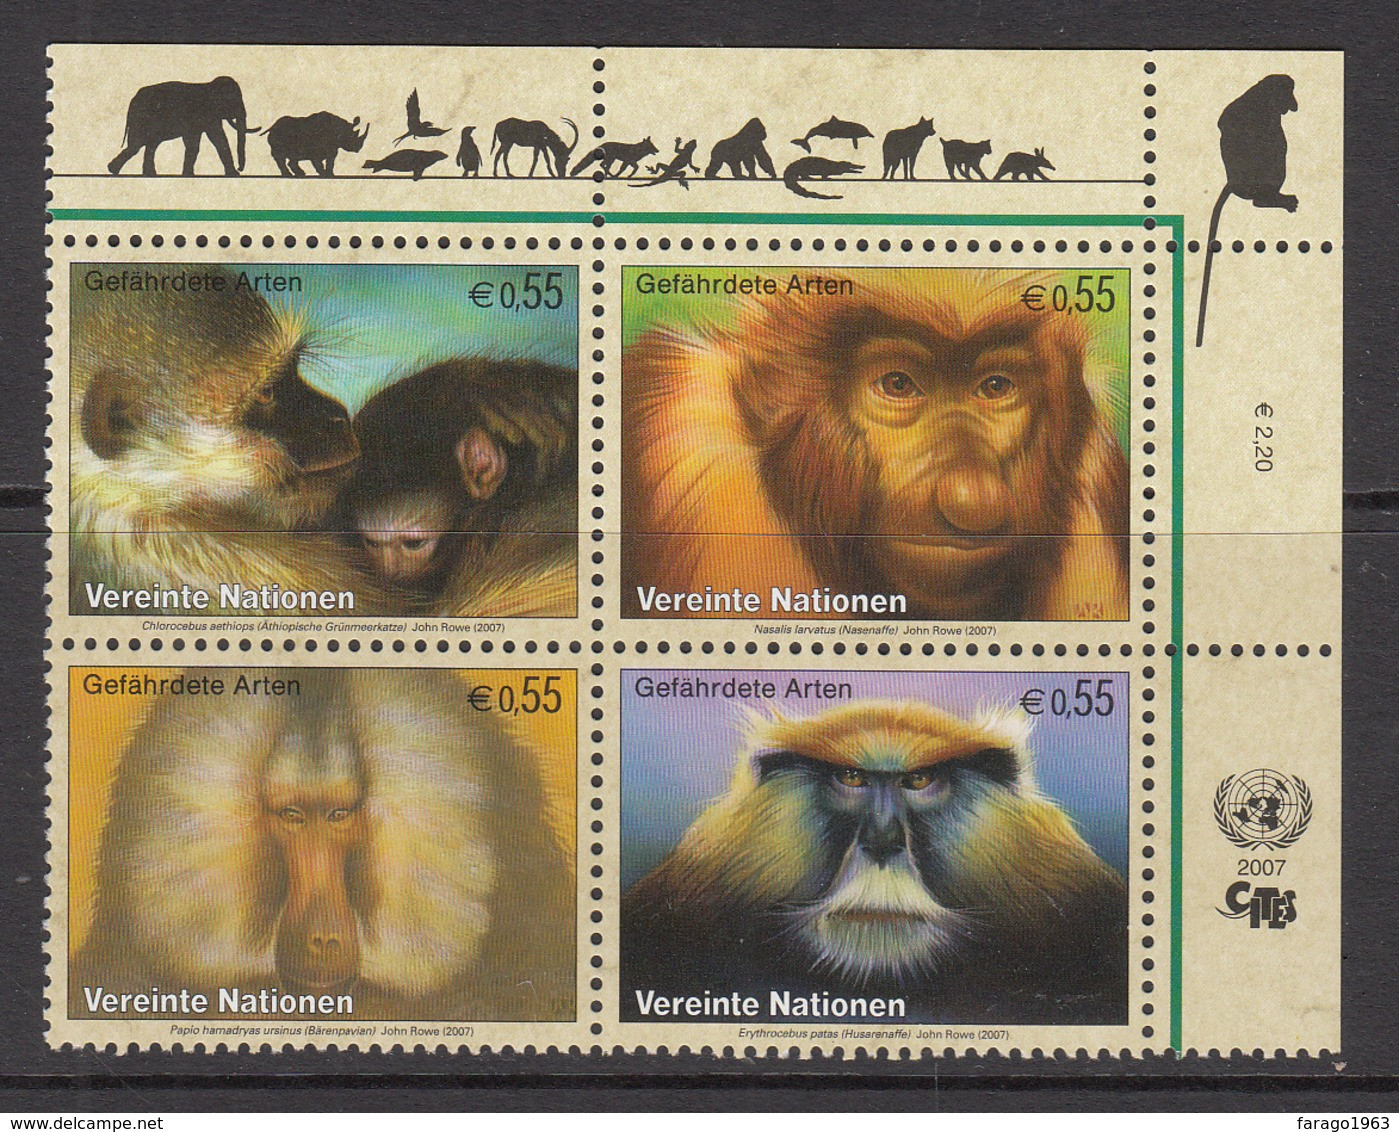 2007 United Nations Vienna Endangered Animals Monkeys Primates Block Of 4 MNH @ BELOW FACE VALUE - Unused Stamps